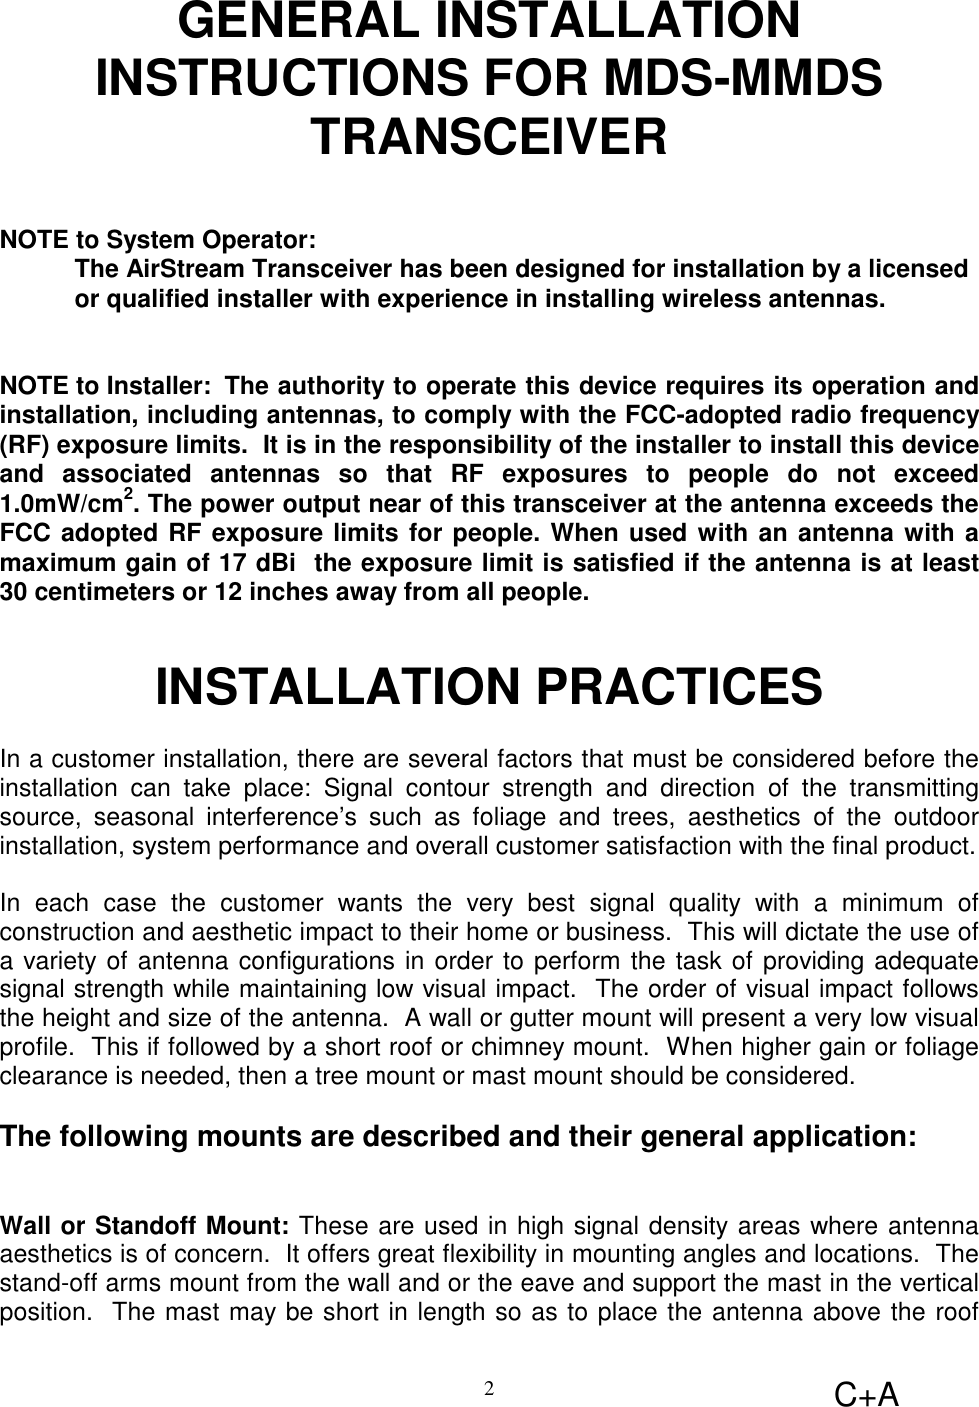 C+A2GENERAL INSTALLATIONINSTRUCTIONS FOR MDS-MMDSTRANSCEIVERNOTE to System Operator:The AirStream Transceiver has been designed for installation by a licensedor qualified installer with experience in installing wireless antennas.NOTE to Installer:  The authority to operate this device requires its operation andinstallation, including antennas, to comply with the FCC-adopted radio frequency(RF) exposure limits.  It is in the responsibility of the installer to install this deviceand associated antennas so that RF exposures to people do not exceed1.0mW/cm2. The power output near of this transceiver at the antenna exceeds theFCC adopted RF exposure limits for people. When used with an antenna with amaximum gain of 17 dBi  the exposure limit is satisfied if the antenna is at least30 centimeters or 12 inches away from all people.INSTALLATION PRACTICESIn a customer installation, there are several factors that must be considered before theinstallation can take place: Signal contour strength and direction of the transmittingsource, seasonal interference’s such as foliage and trees, aesthetics of the outdoorinstallation, system performance and overall customer satisfaction with the final product.In each case the customer wants the very best signal quality with a minimum ofconstruction and aesthetic impact to their home or business.  This will dictate the use ofa variety of antenna configurations in order to perform the task of providing adequatesignal strength while maintaining low visual impact.  The order of visual impact followsthe height and size of the antenna.  A wall or gutter mount will present a very low visualprofile.  This if followed by a short roof or chimney mount.  When higher gain or foliageclearance is needed, then a tree mount or mast mount should be considered.The following mounts are described and their general application:Wall or Standoff Mount: These are used in high signal density areas where antennaaesthetics is of concern.  It offers great flexibility in mounting angles and locations.  Thestand-off arms mount from the wall and or the eave and support the mast in the verticalposition.  The mast may be short in length so as to place the antenna above the roof